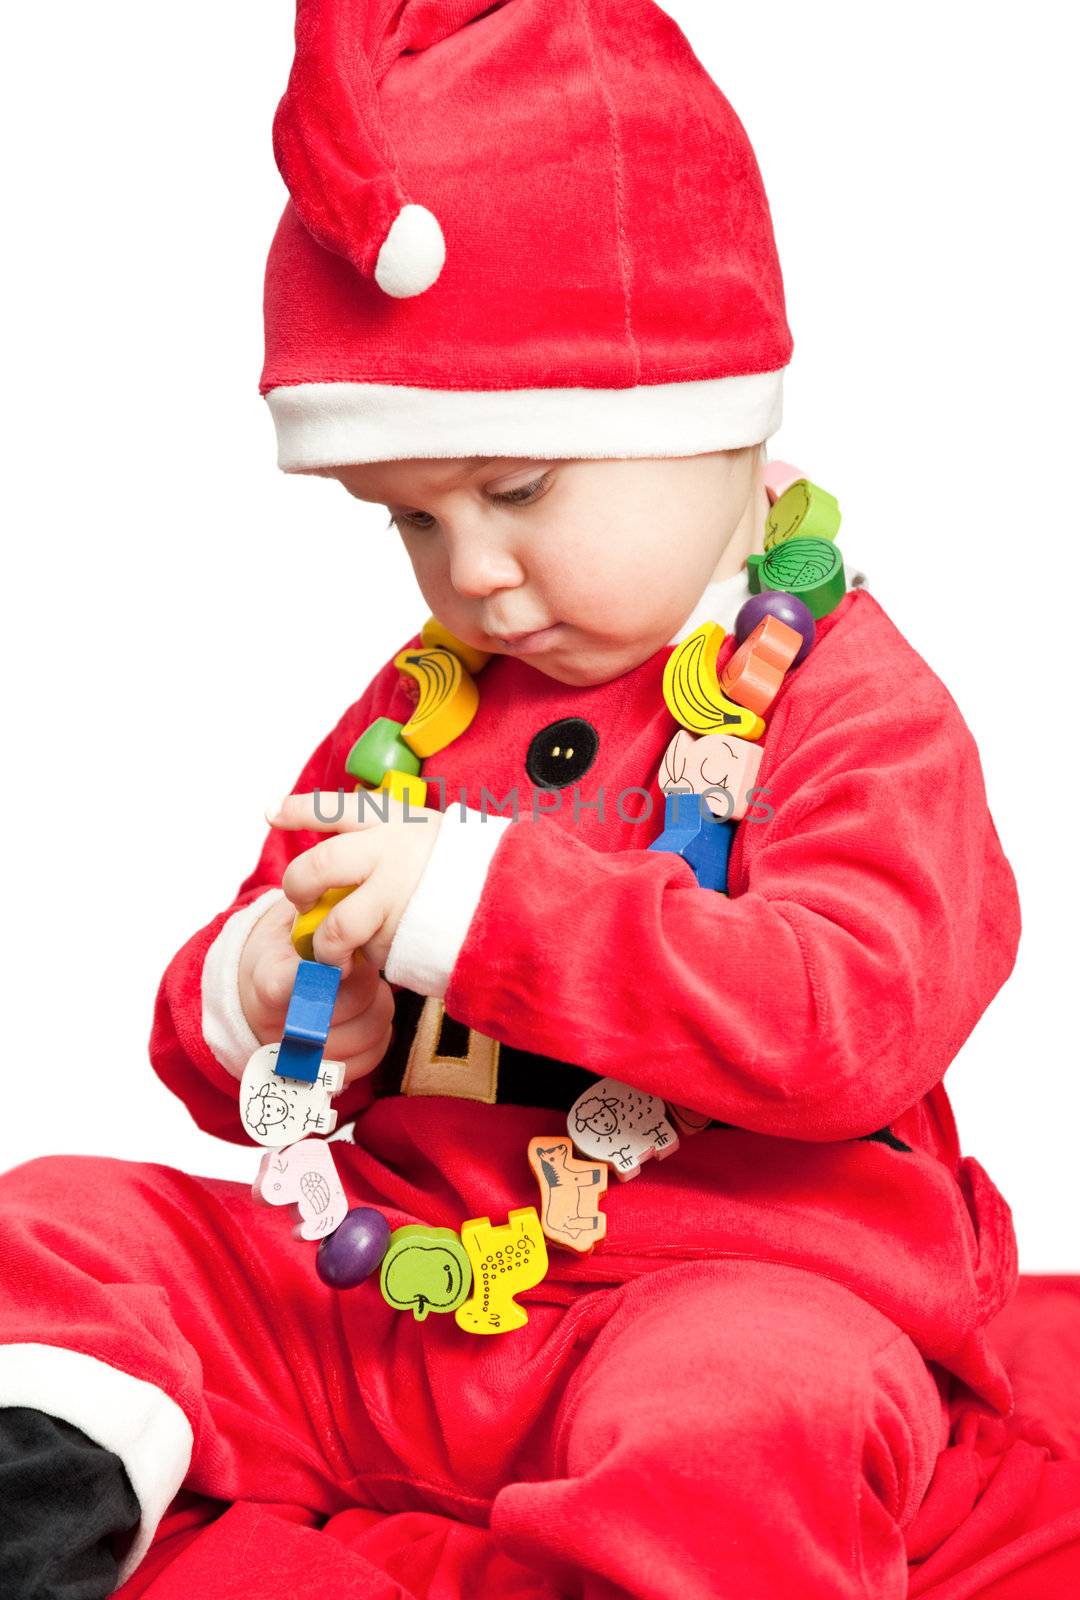 Little baby girl wearing Santa Claus costume playing with wooden beads on white background